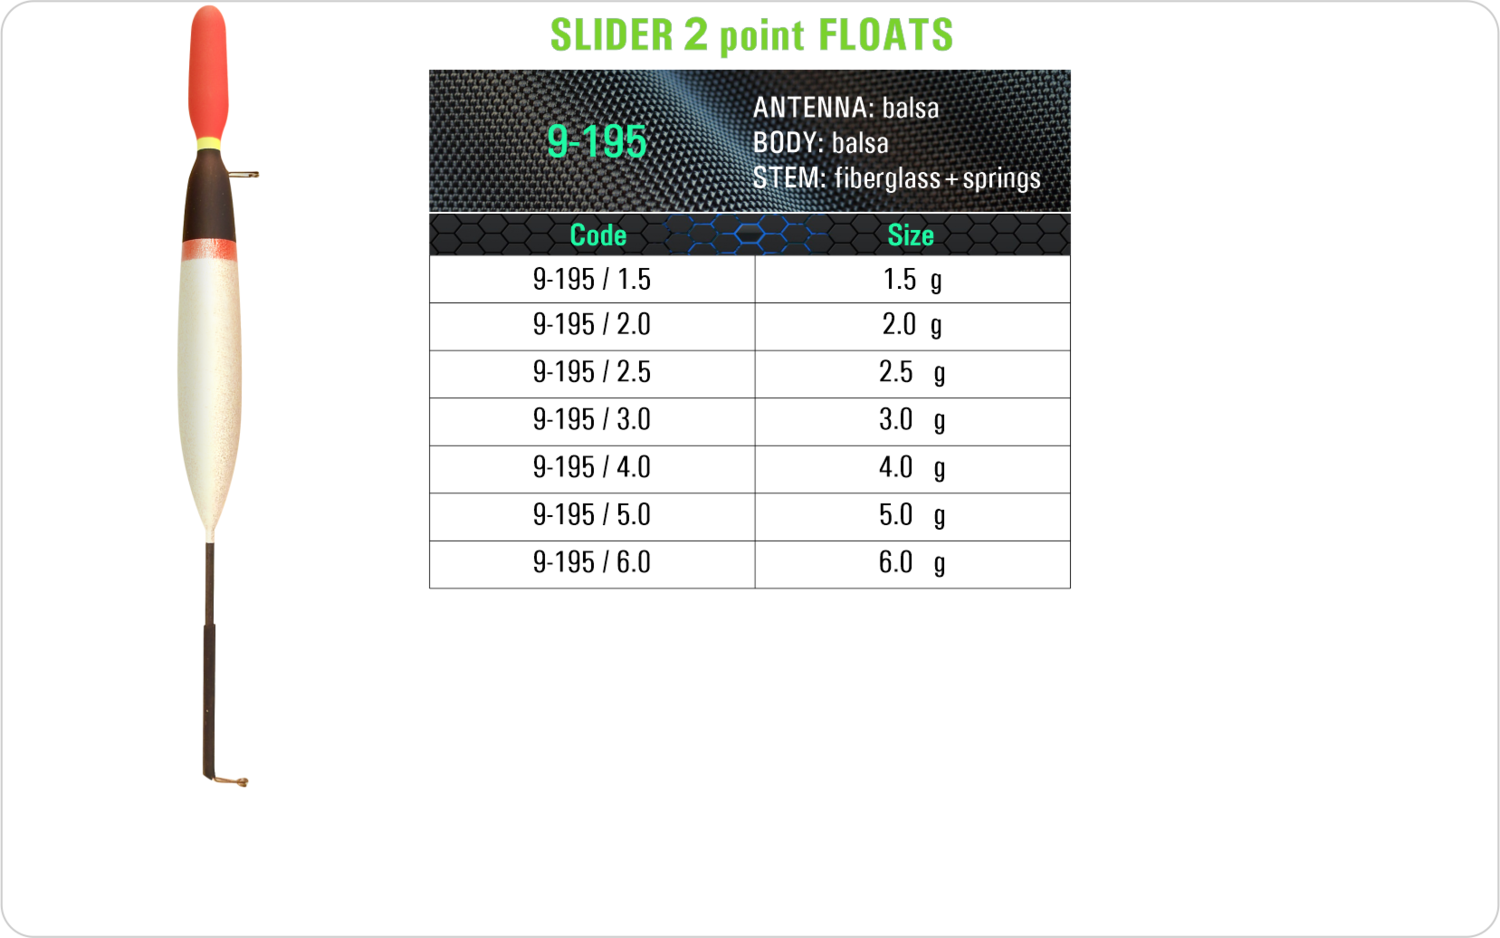 SF 9-195 - Lake and river float model and table containing an additional information about this float with different codes, sizes, types of the body, the stem and the antenna of the float.